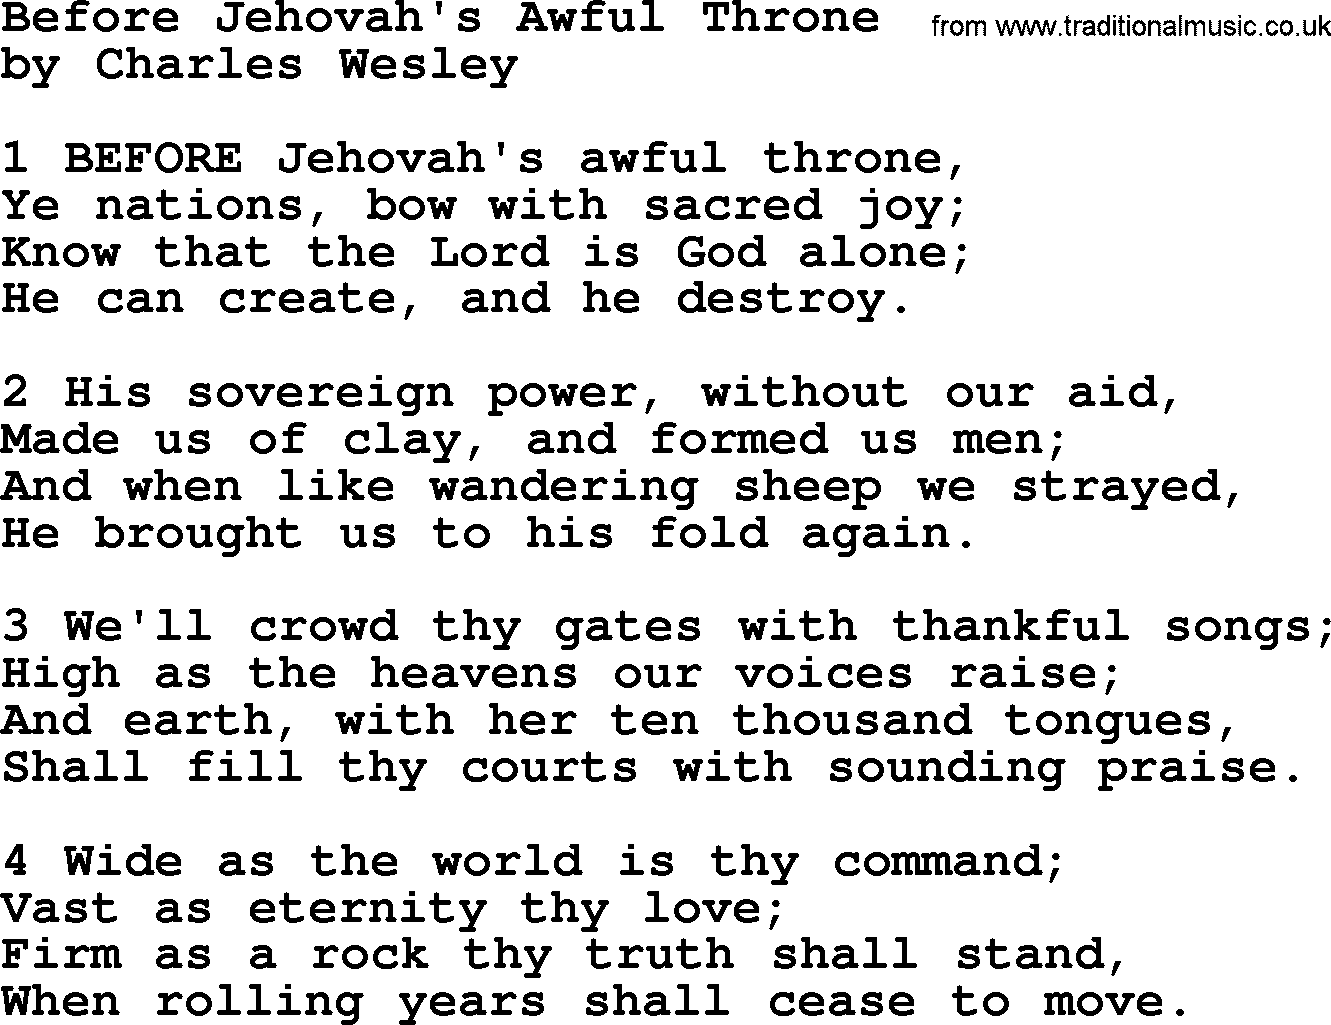 Charles Wesley hymn: Before Jehovah's Awful Throne, lyrics